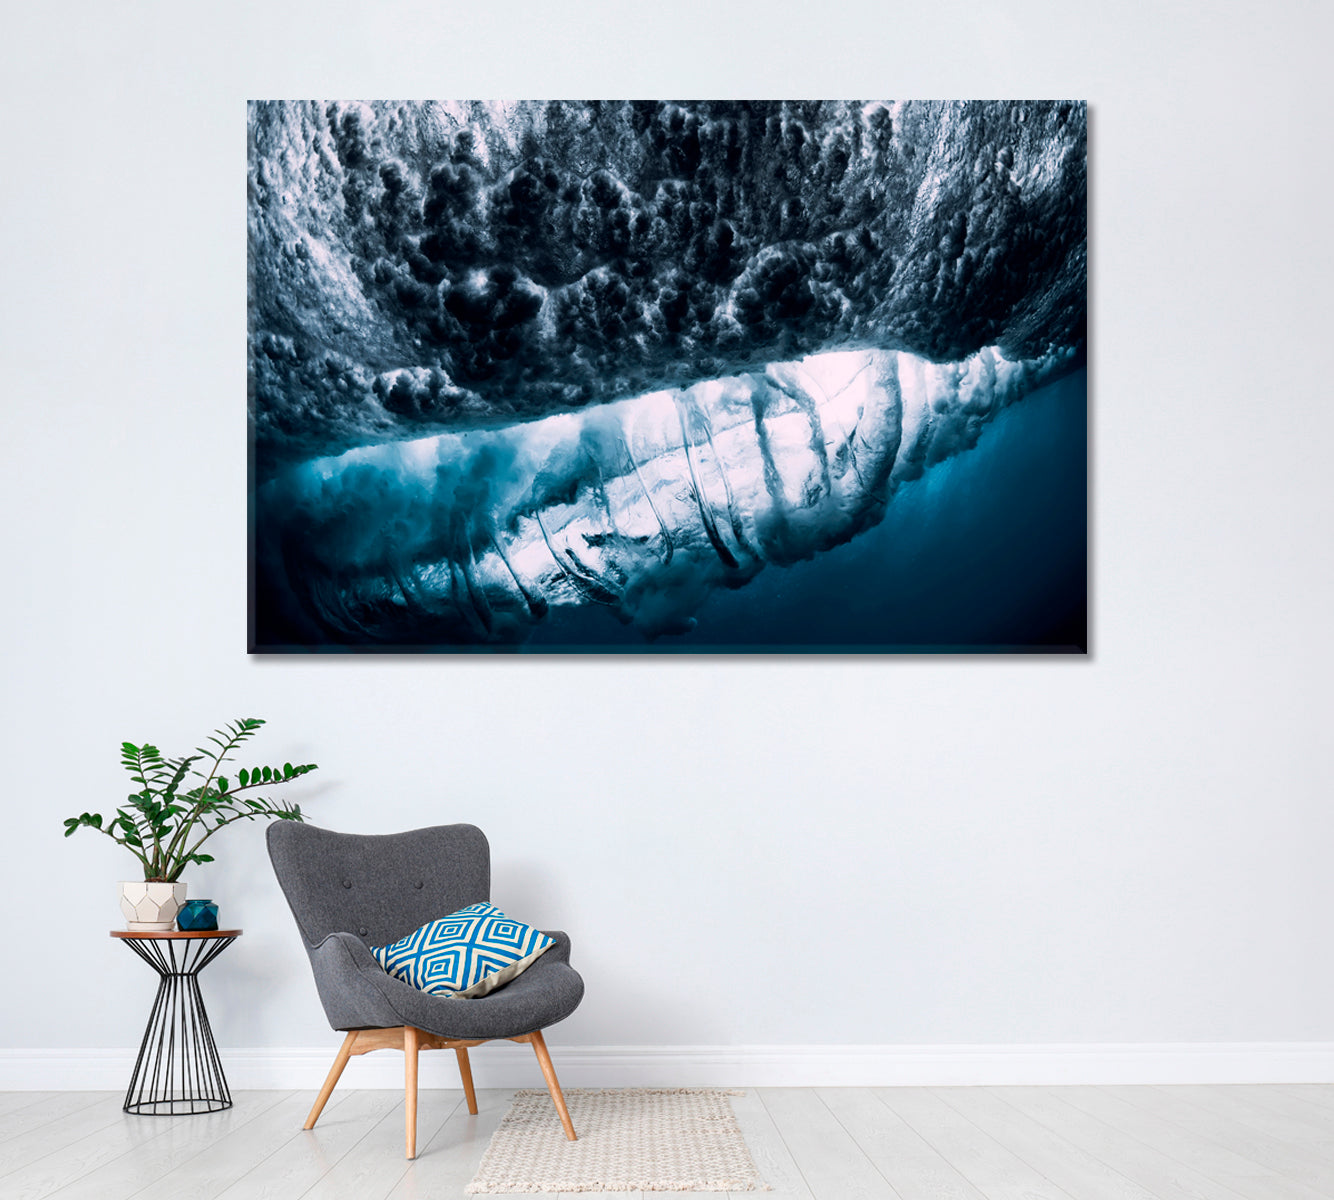 Ocean Wave Underwater with Air Bubbles Canvas Print ArtLexy 1 Panel 24"x16" inches 